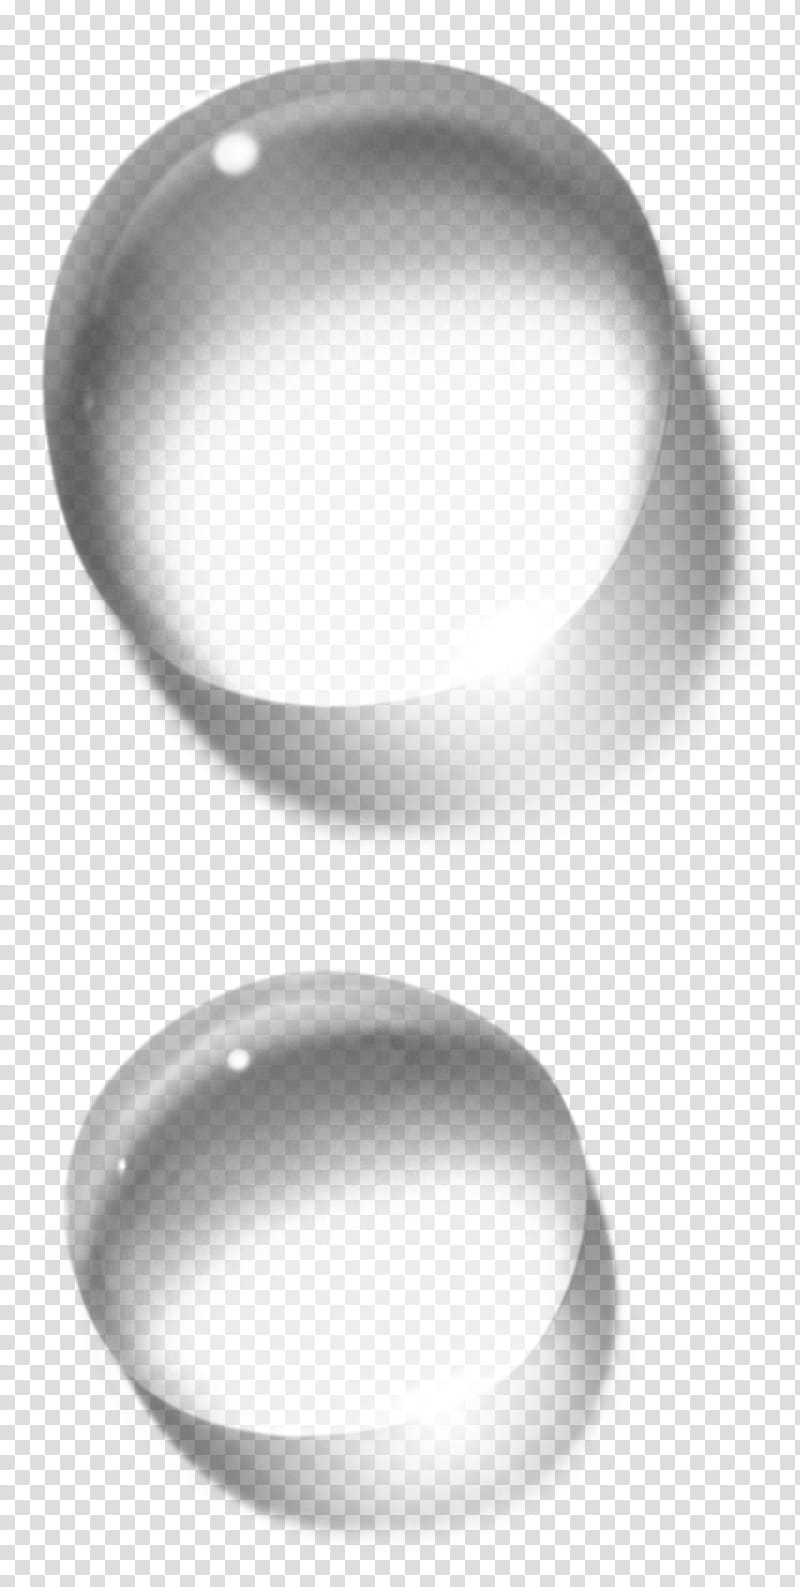 Water Splash, Drop, Liquid, Silver, Circle, Body Jewelry, Oval transparent background PNG clipart